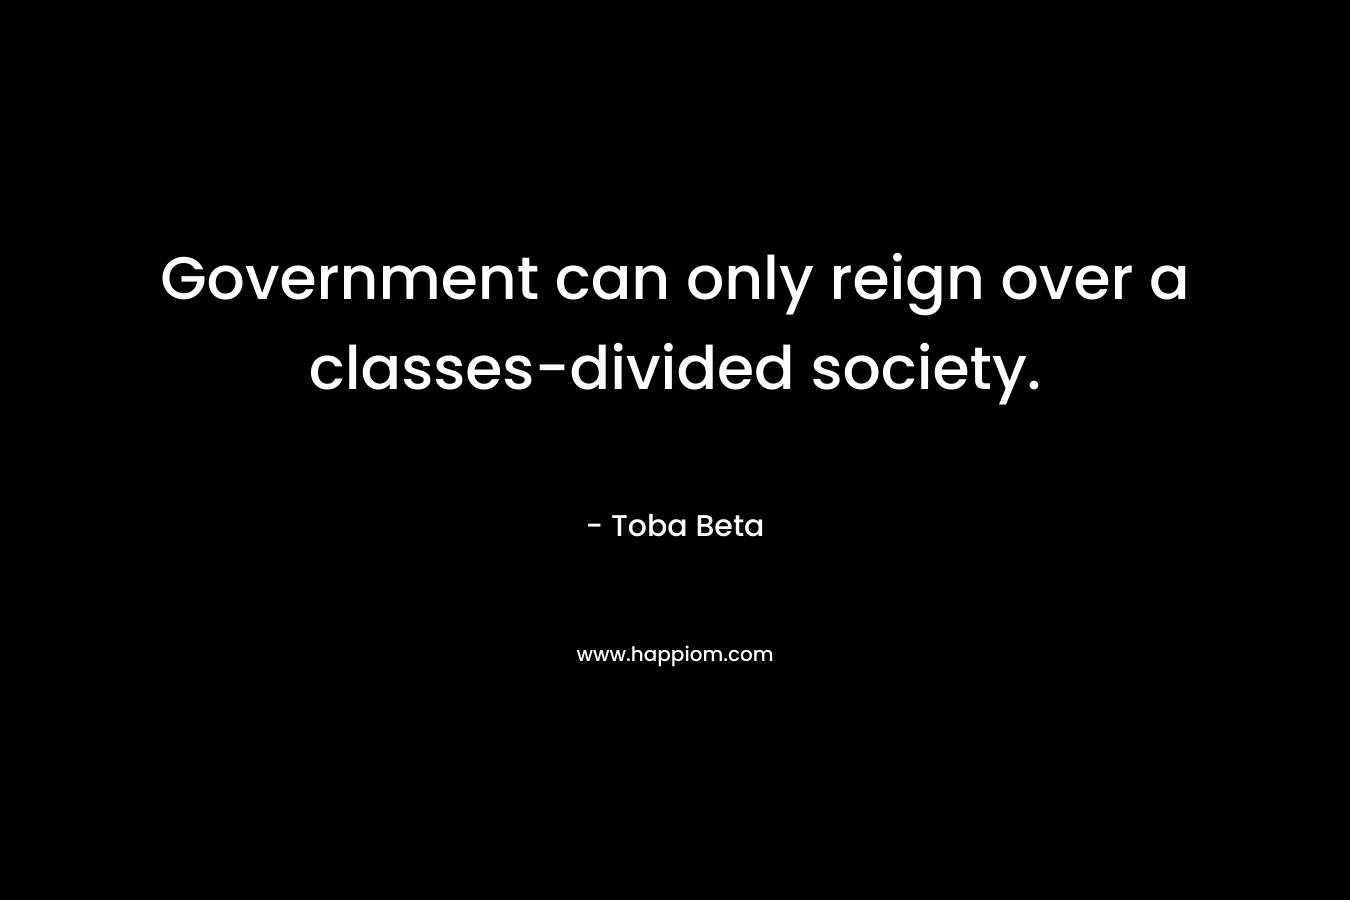 Government can only reign over a classes-divided society. – Toba Beta